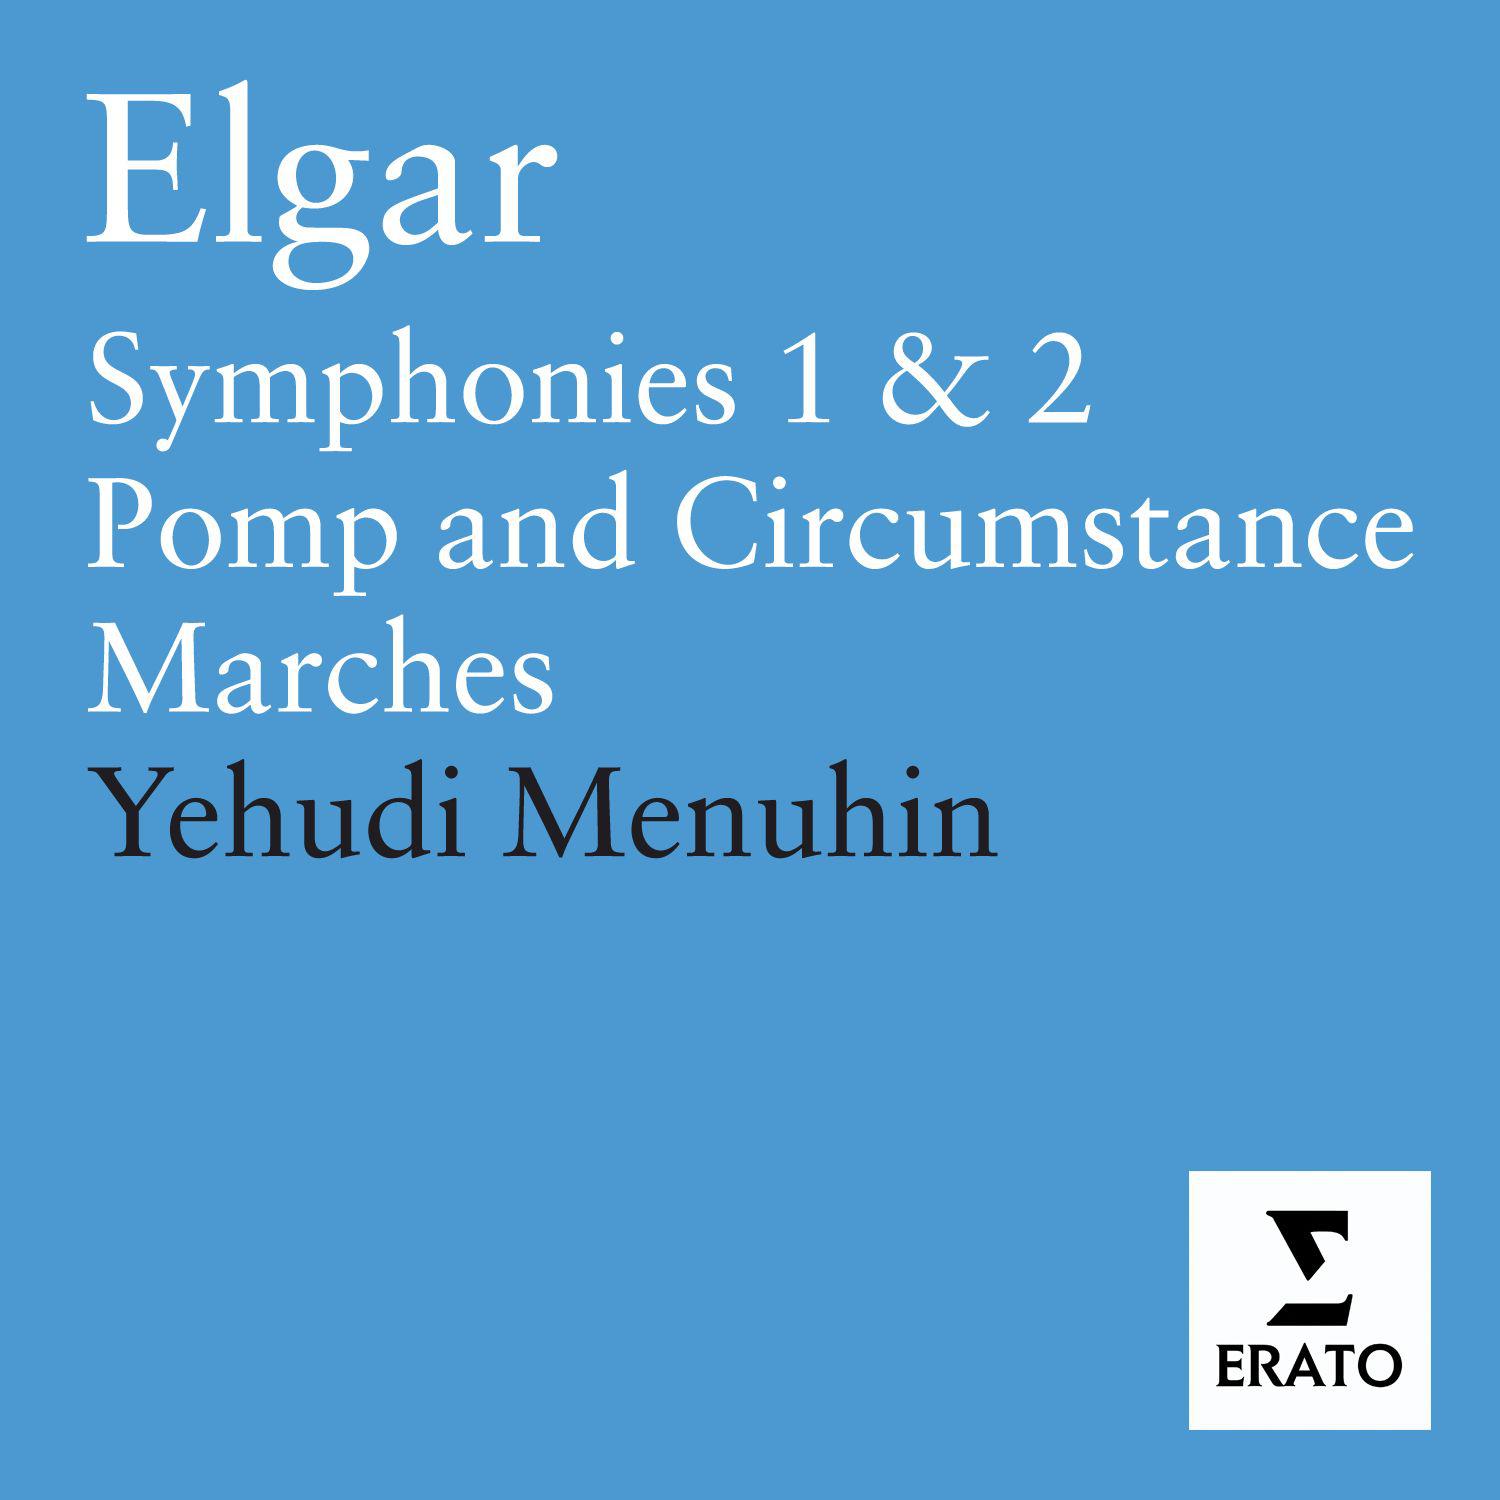 Pomp and Circumstances Marches, Op. 39:No. 4 in G Major